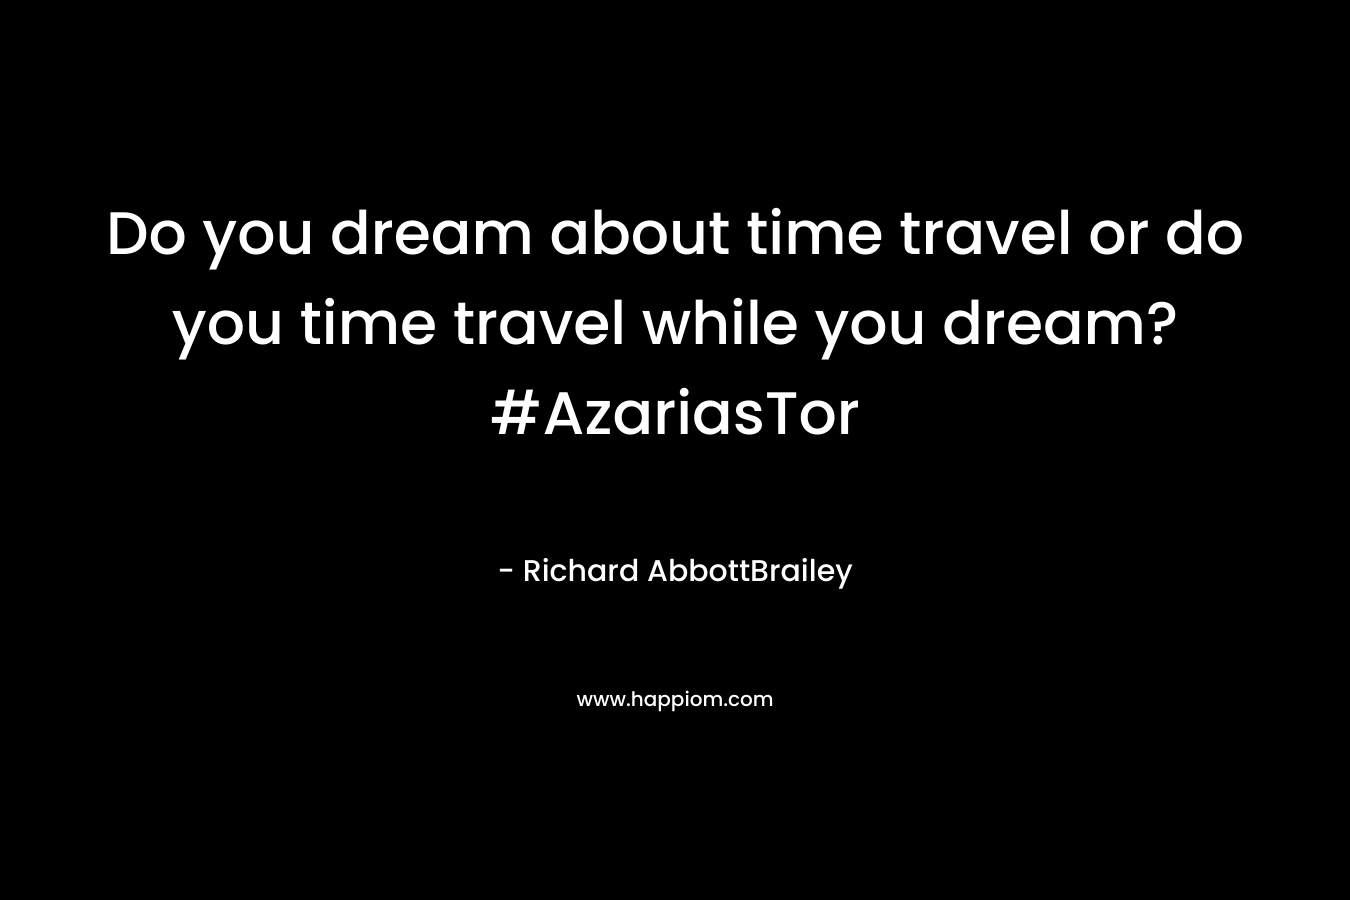 Do you dream about time travel or do you time travel while you dream? #AzariasTor